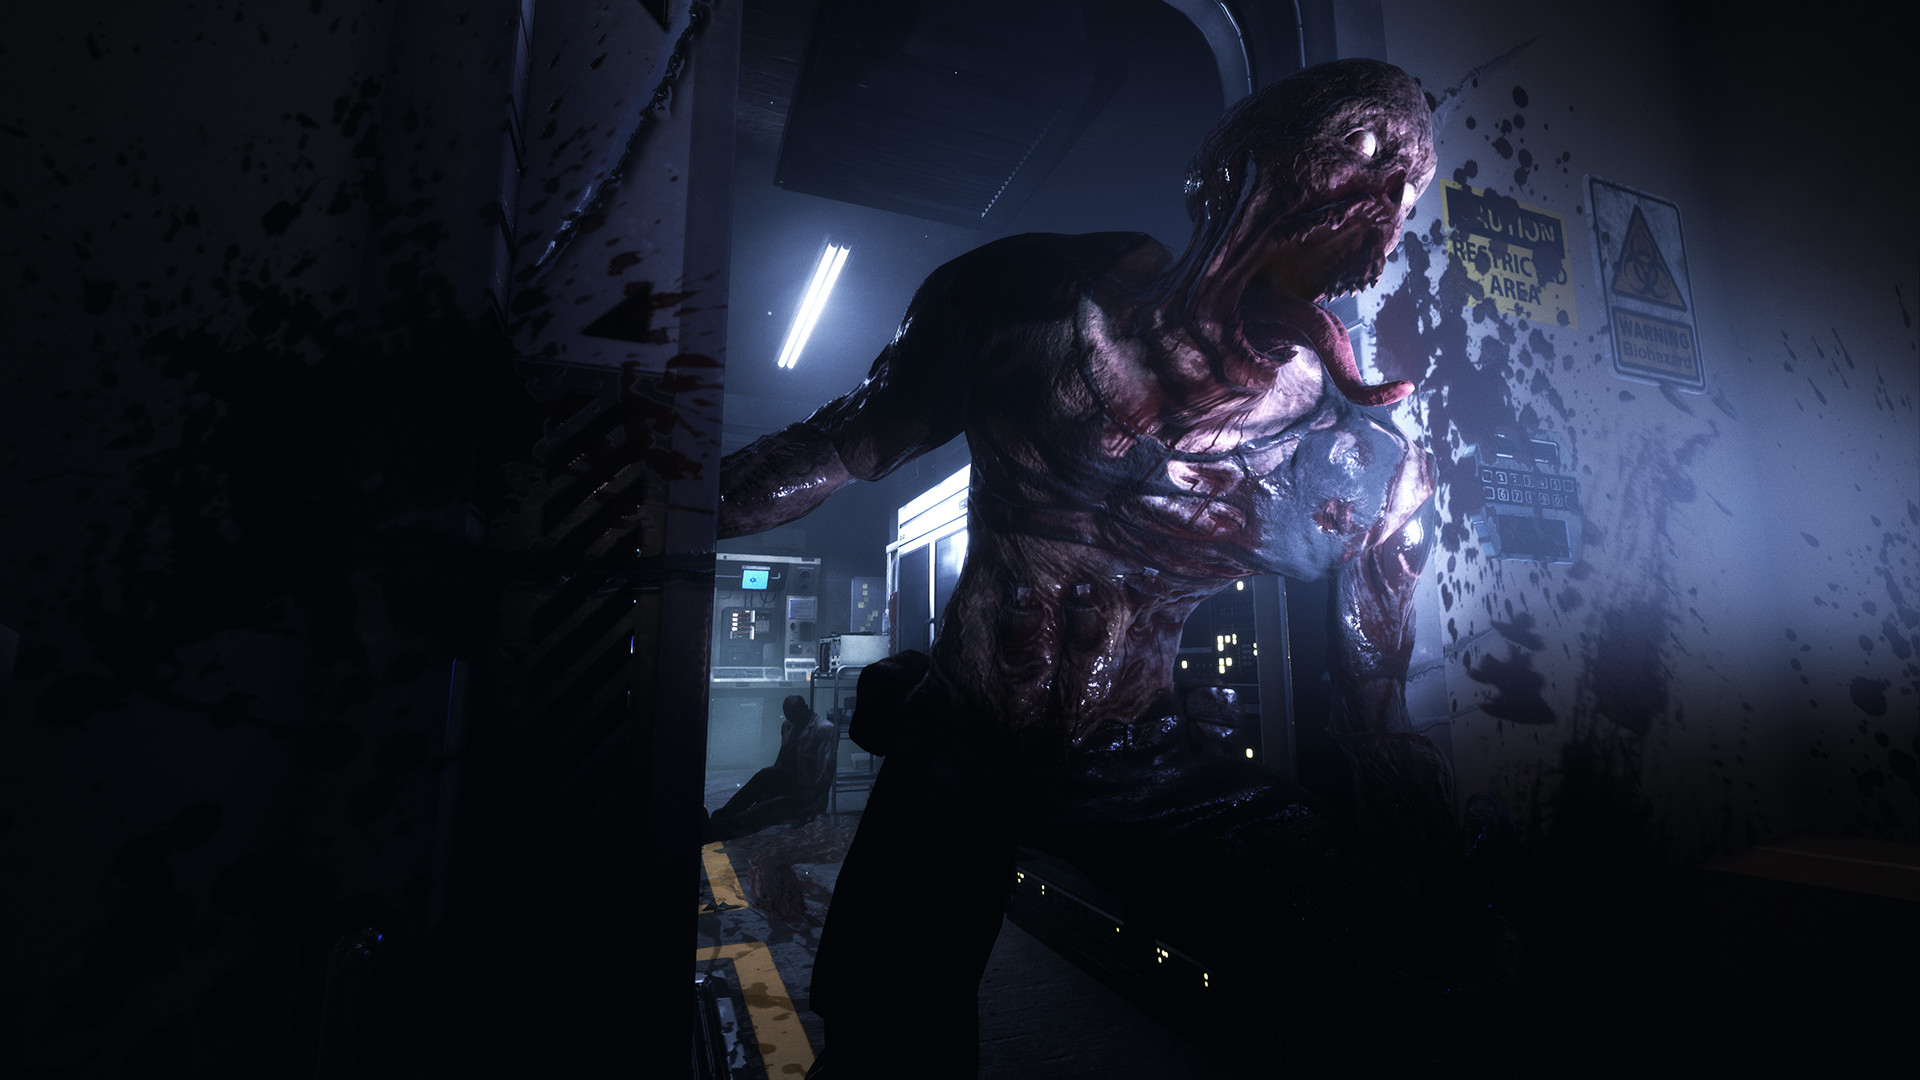 Daymare: 1998 Launches in Summer 2019 for PC, “Soon After” for Consoles